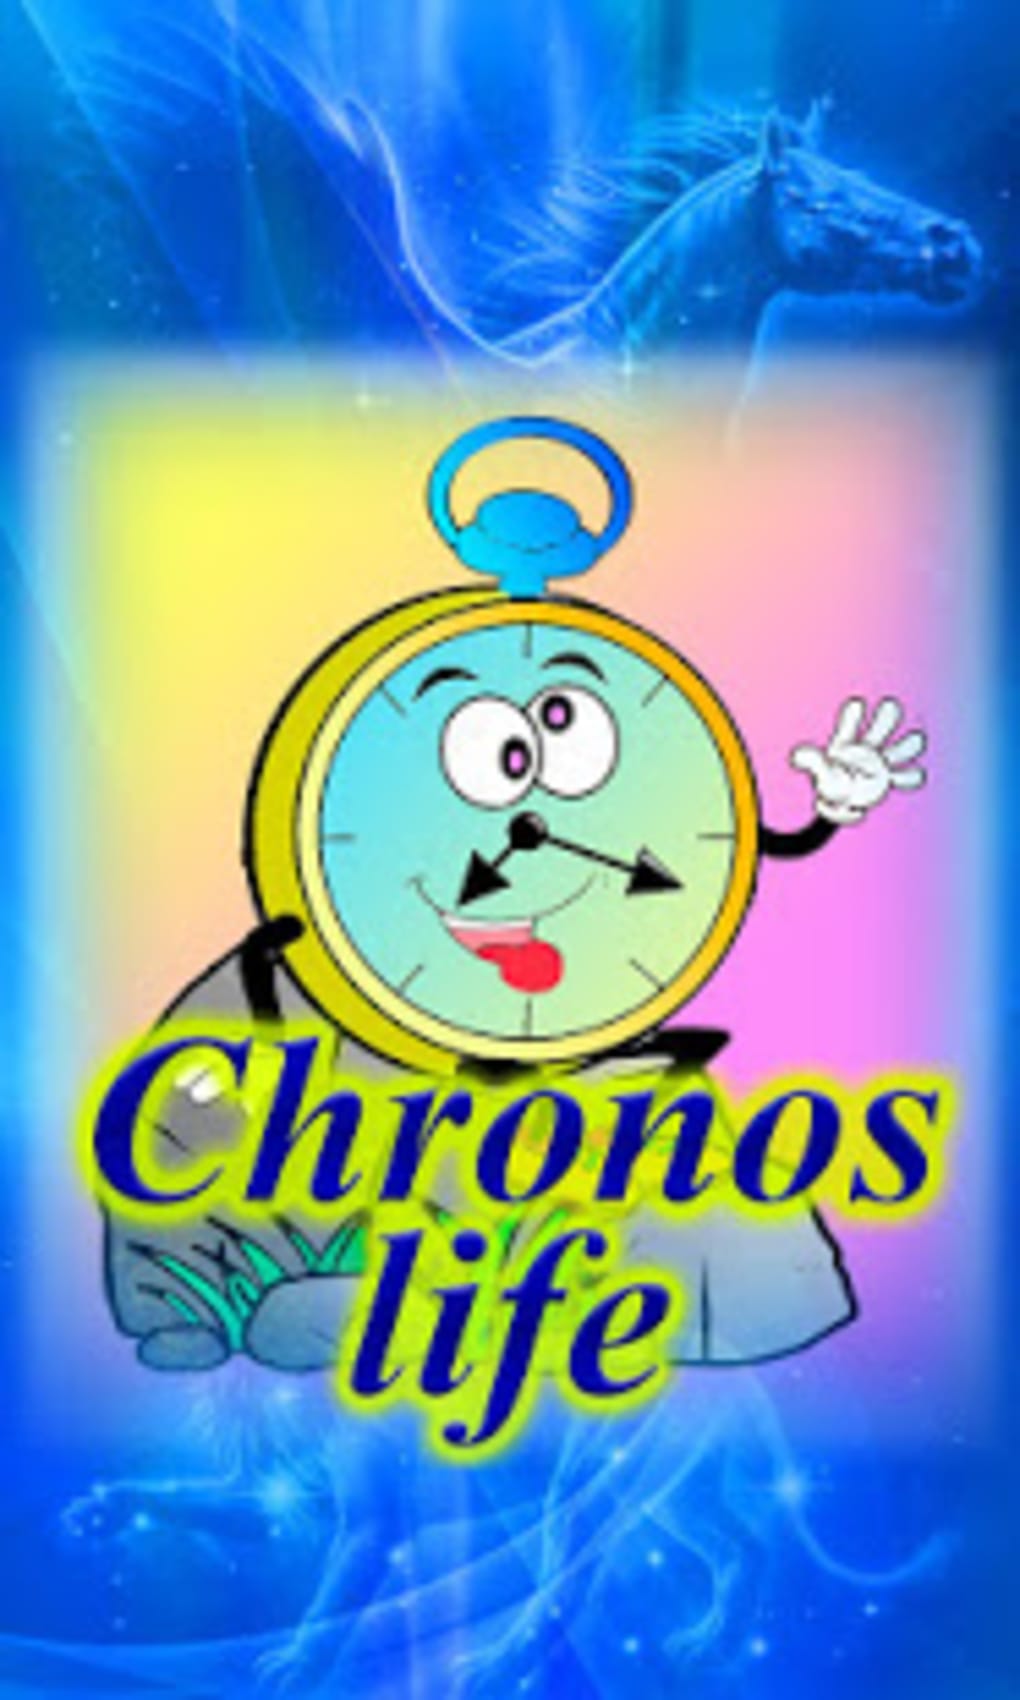 Chrono Life Apk For Android Download - get free robux tips get robux free 2k19 apps i google play